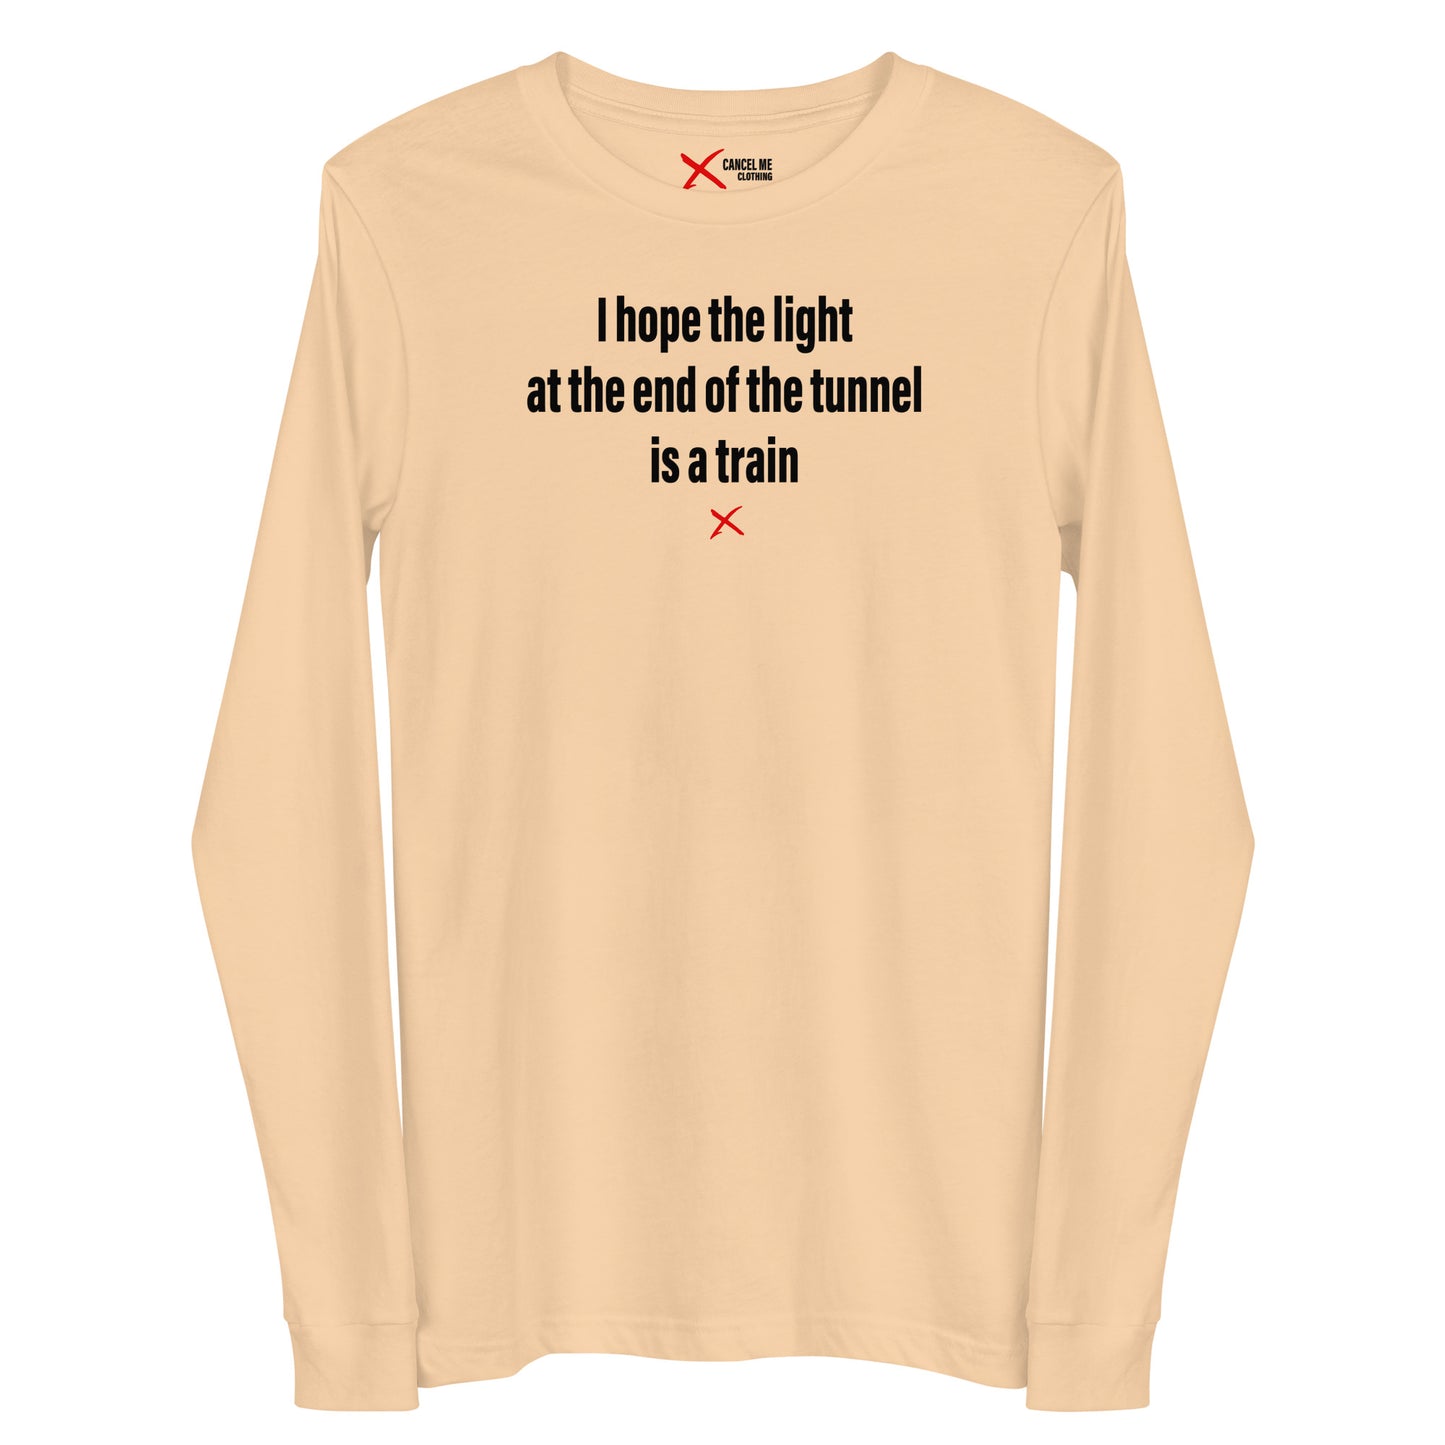 I hope the light at the end of the tunnel is a train - Longsleeve